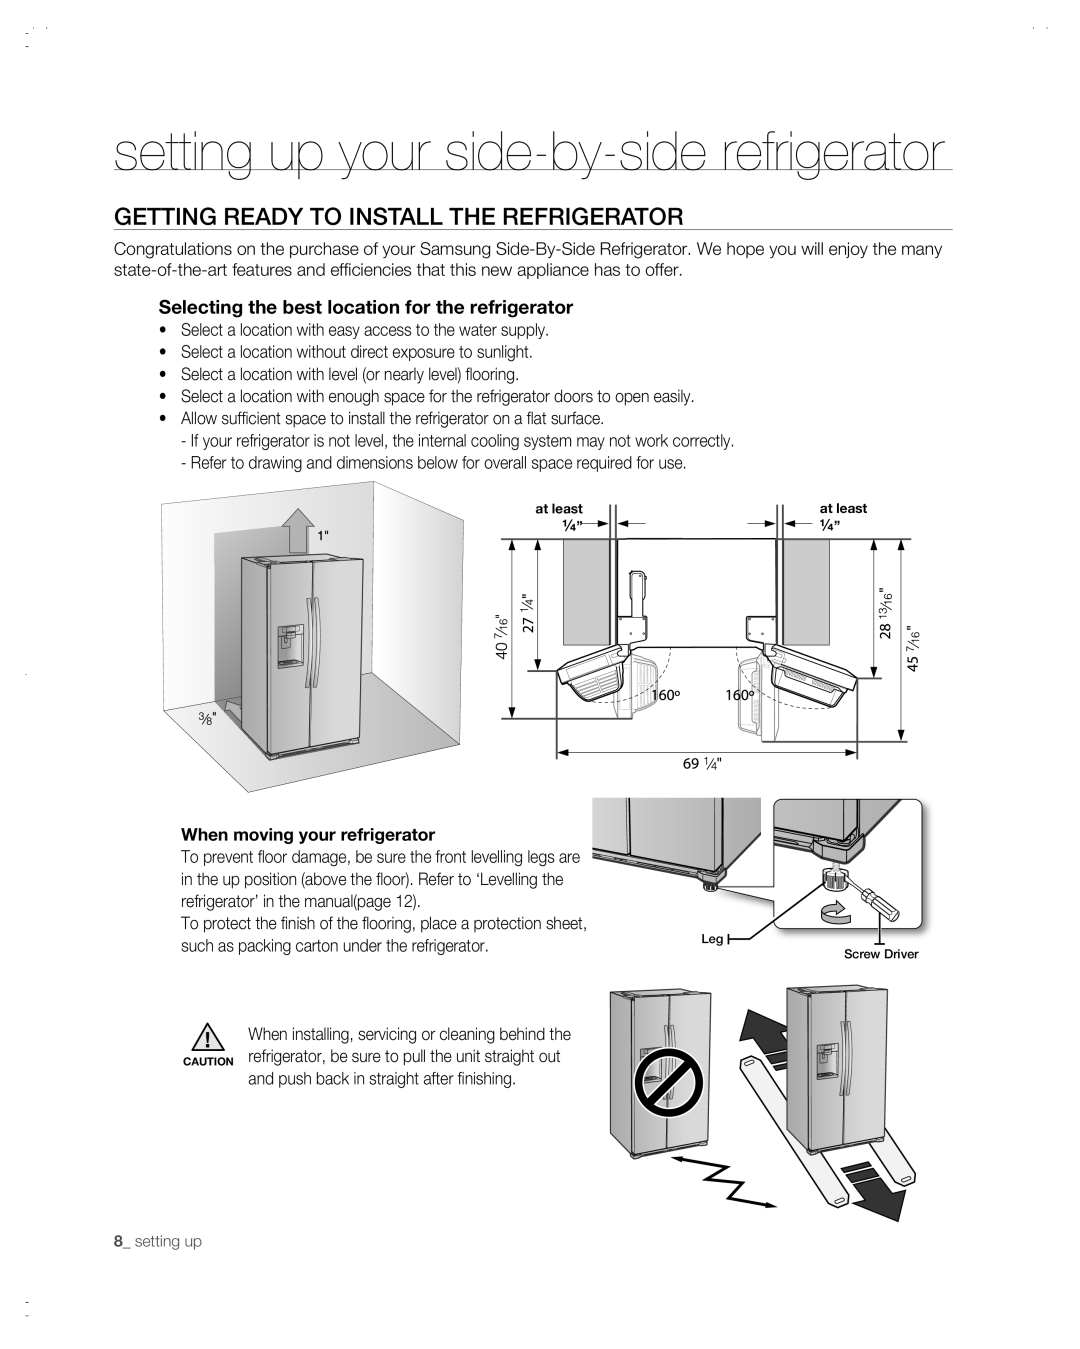 Samsung RSG257AABP user manual setting up your side-by-side refrigerator, Getting ready to install the refrigerator 